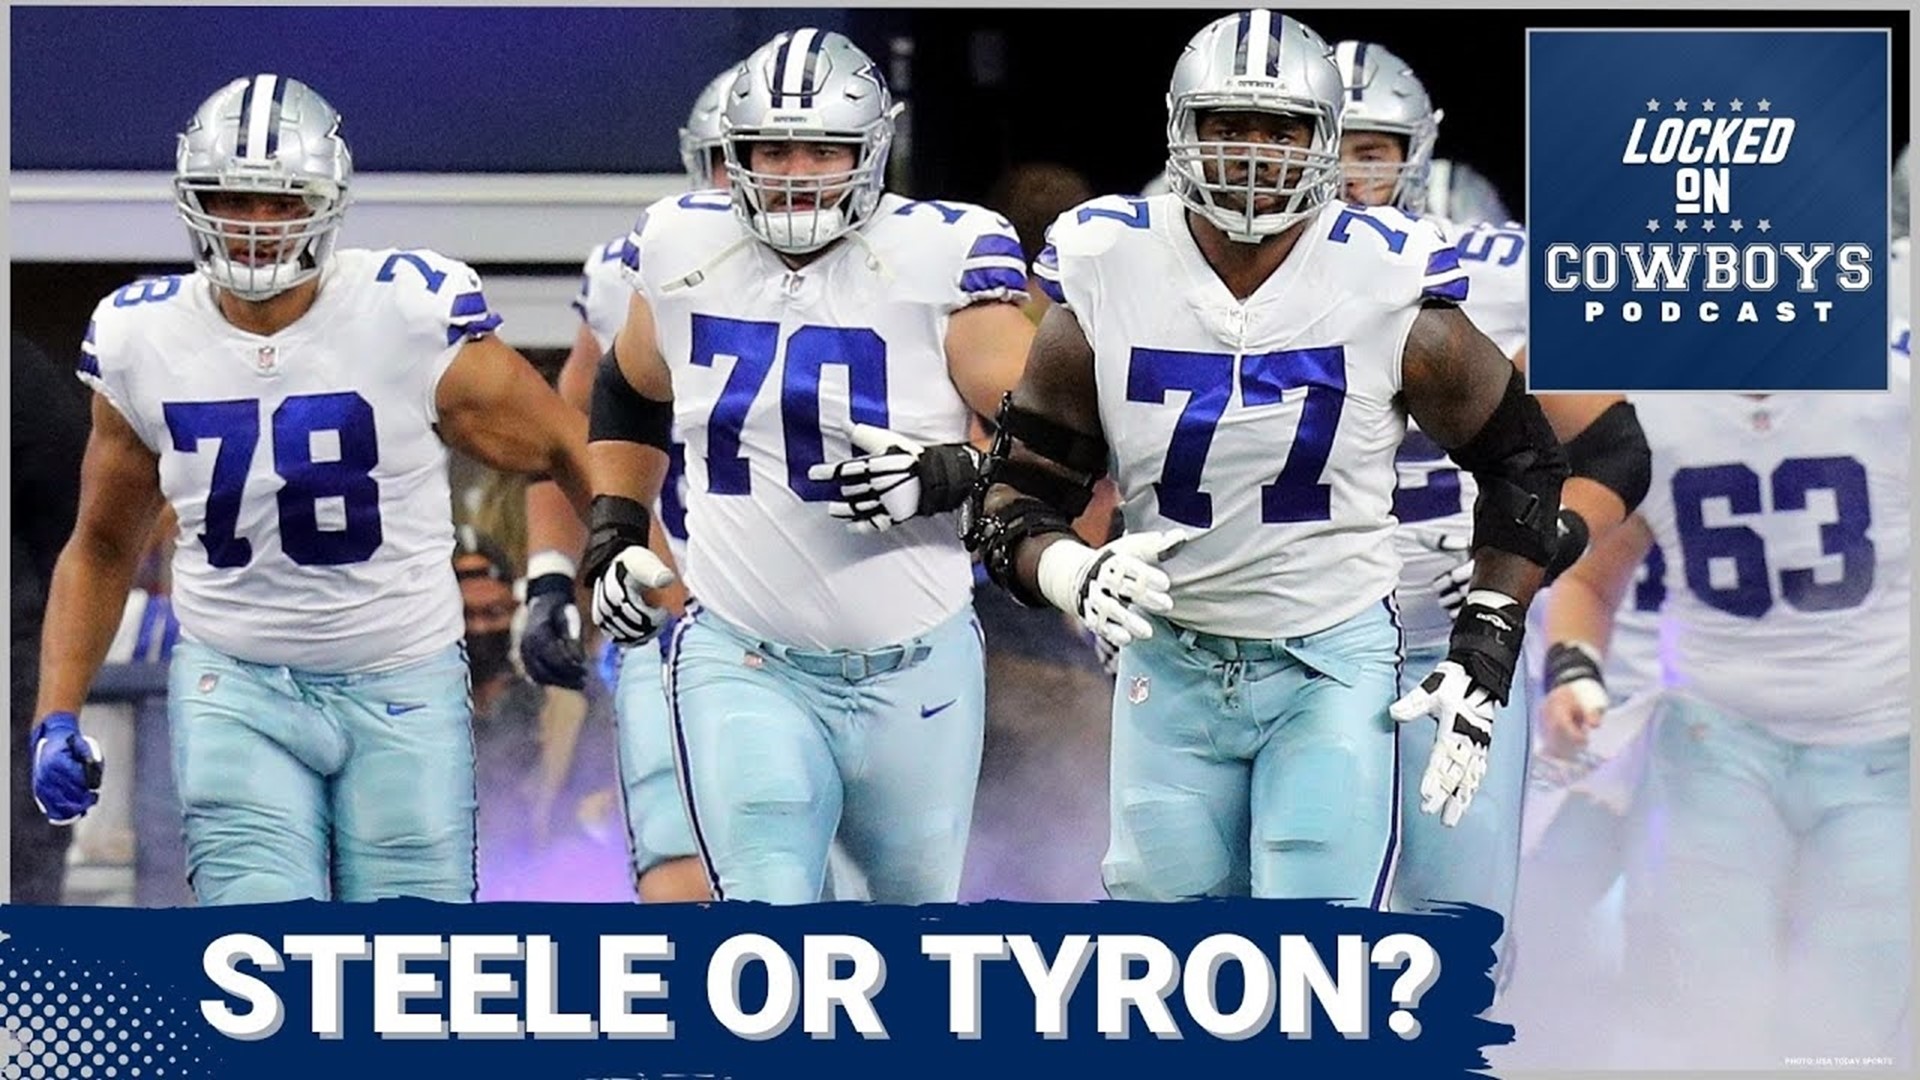 Marcus Mosher and Landon McCool are joined by Voch Lombardi (@VochLombardi) to discuss who should start at right tackle for the Dallas Cowboys during the 2023 season